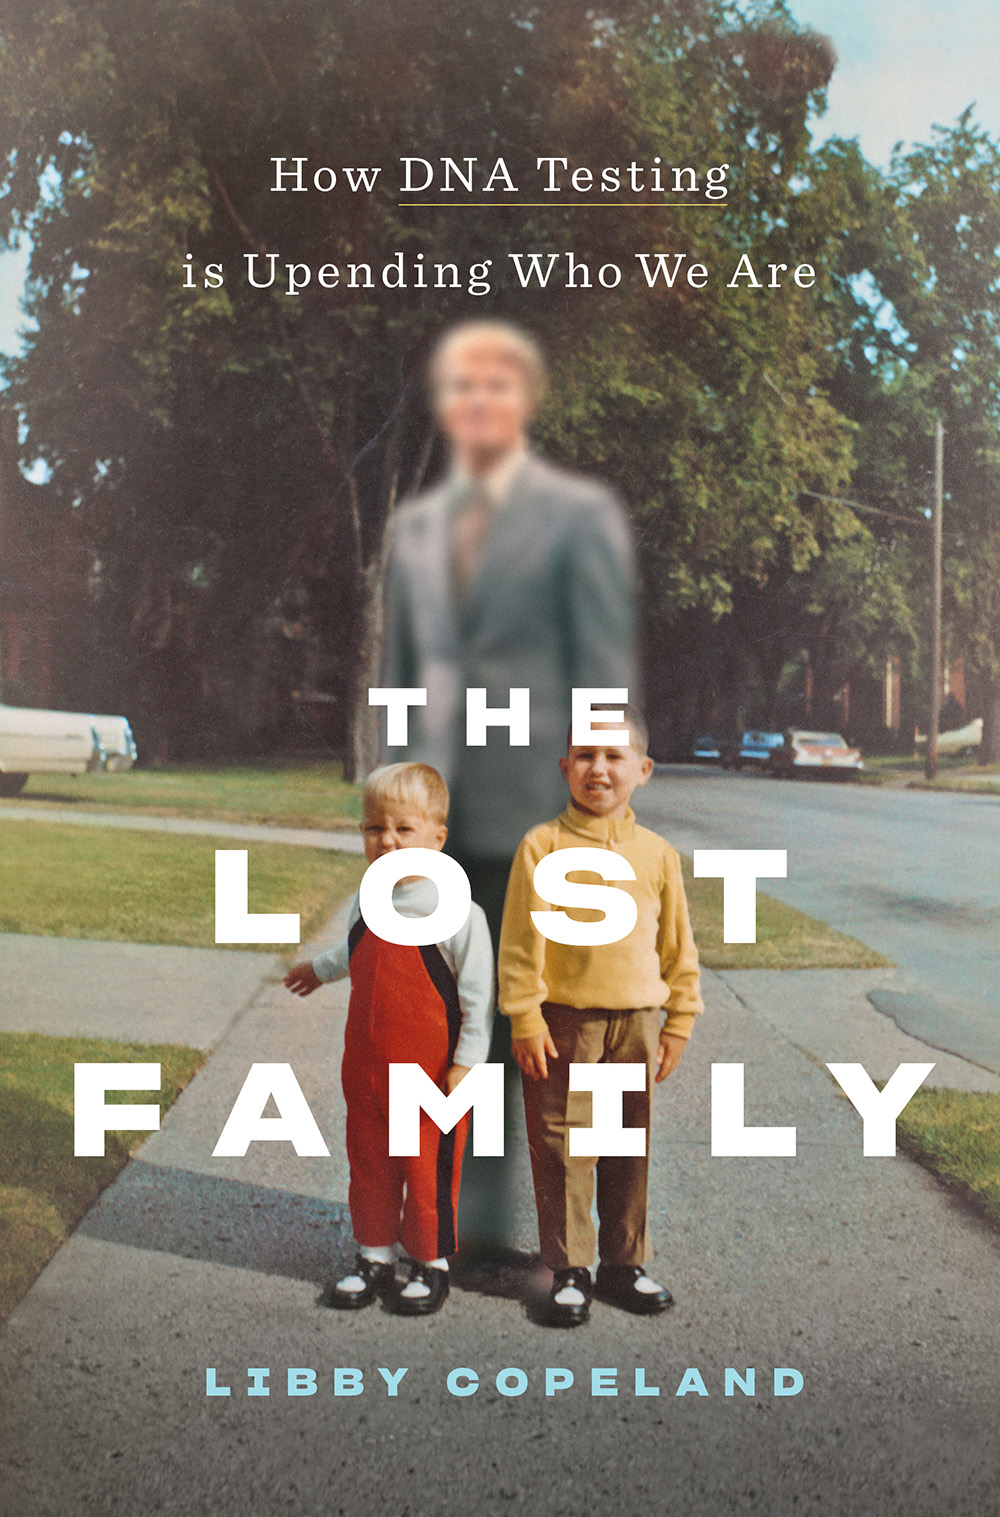 Libby Copeland: The Lost Family: How DNA Testing Is Uncovering Secrets, Reuniting Relatives, and Upending Who We Are (2020, Abrams Press)